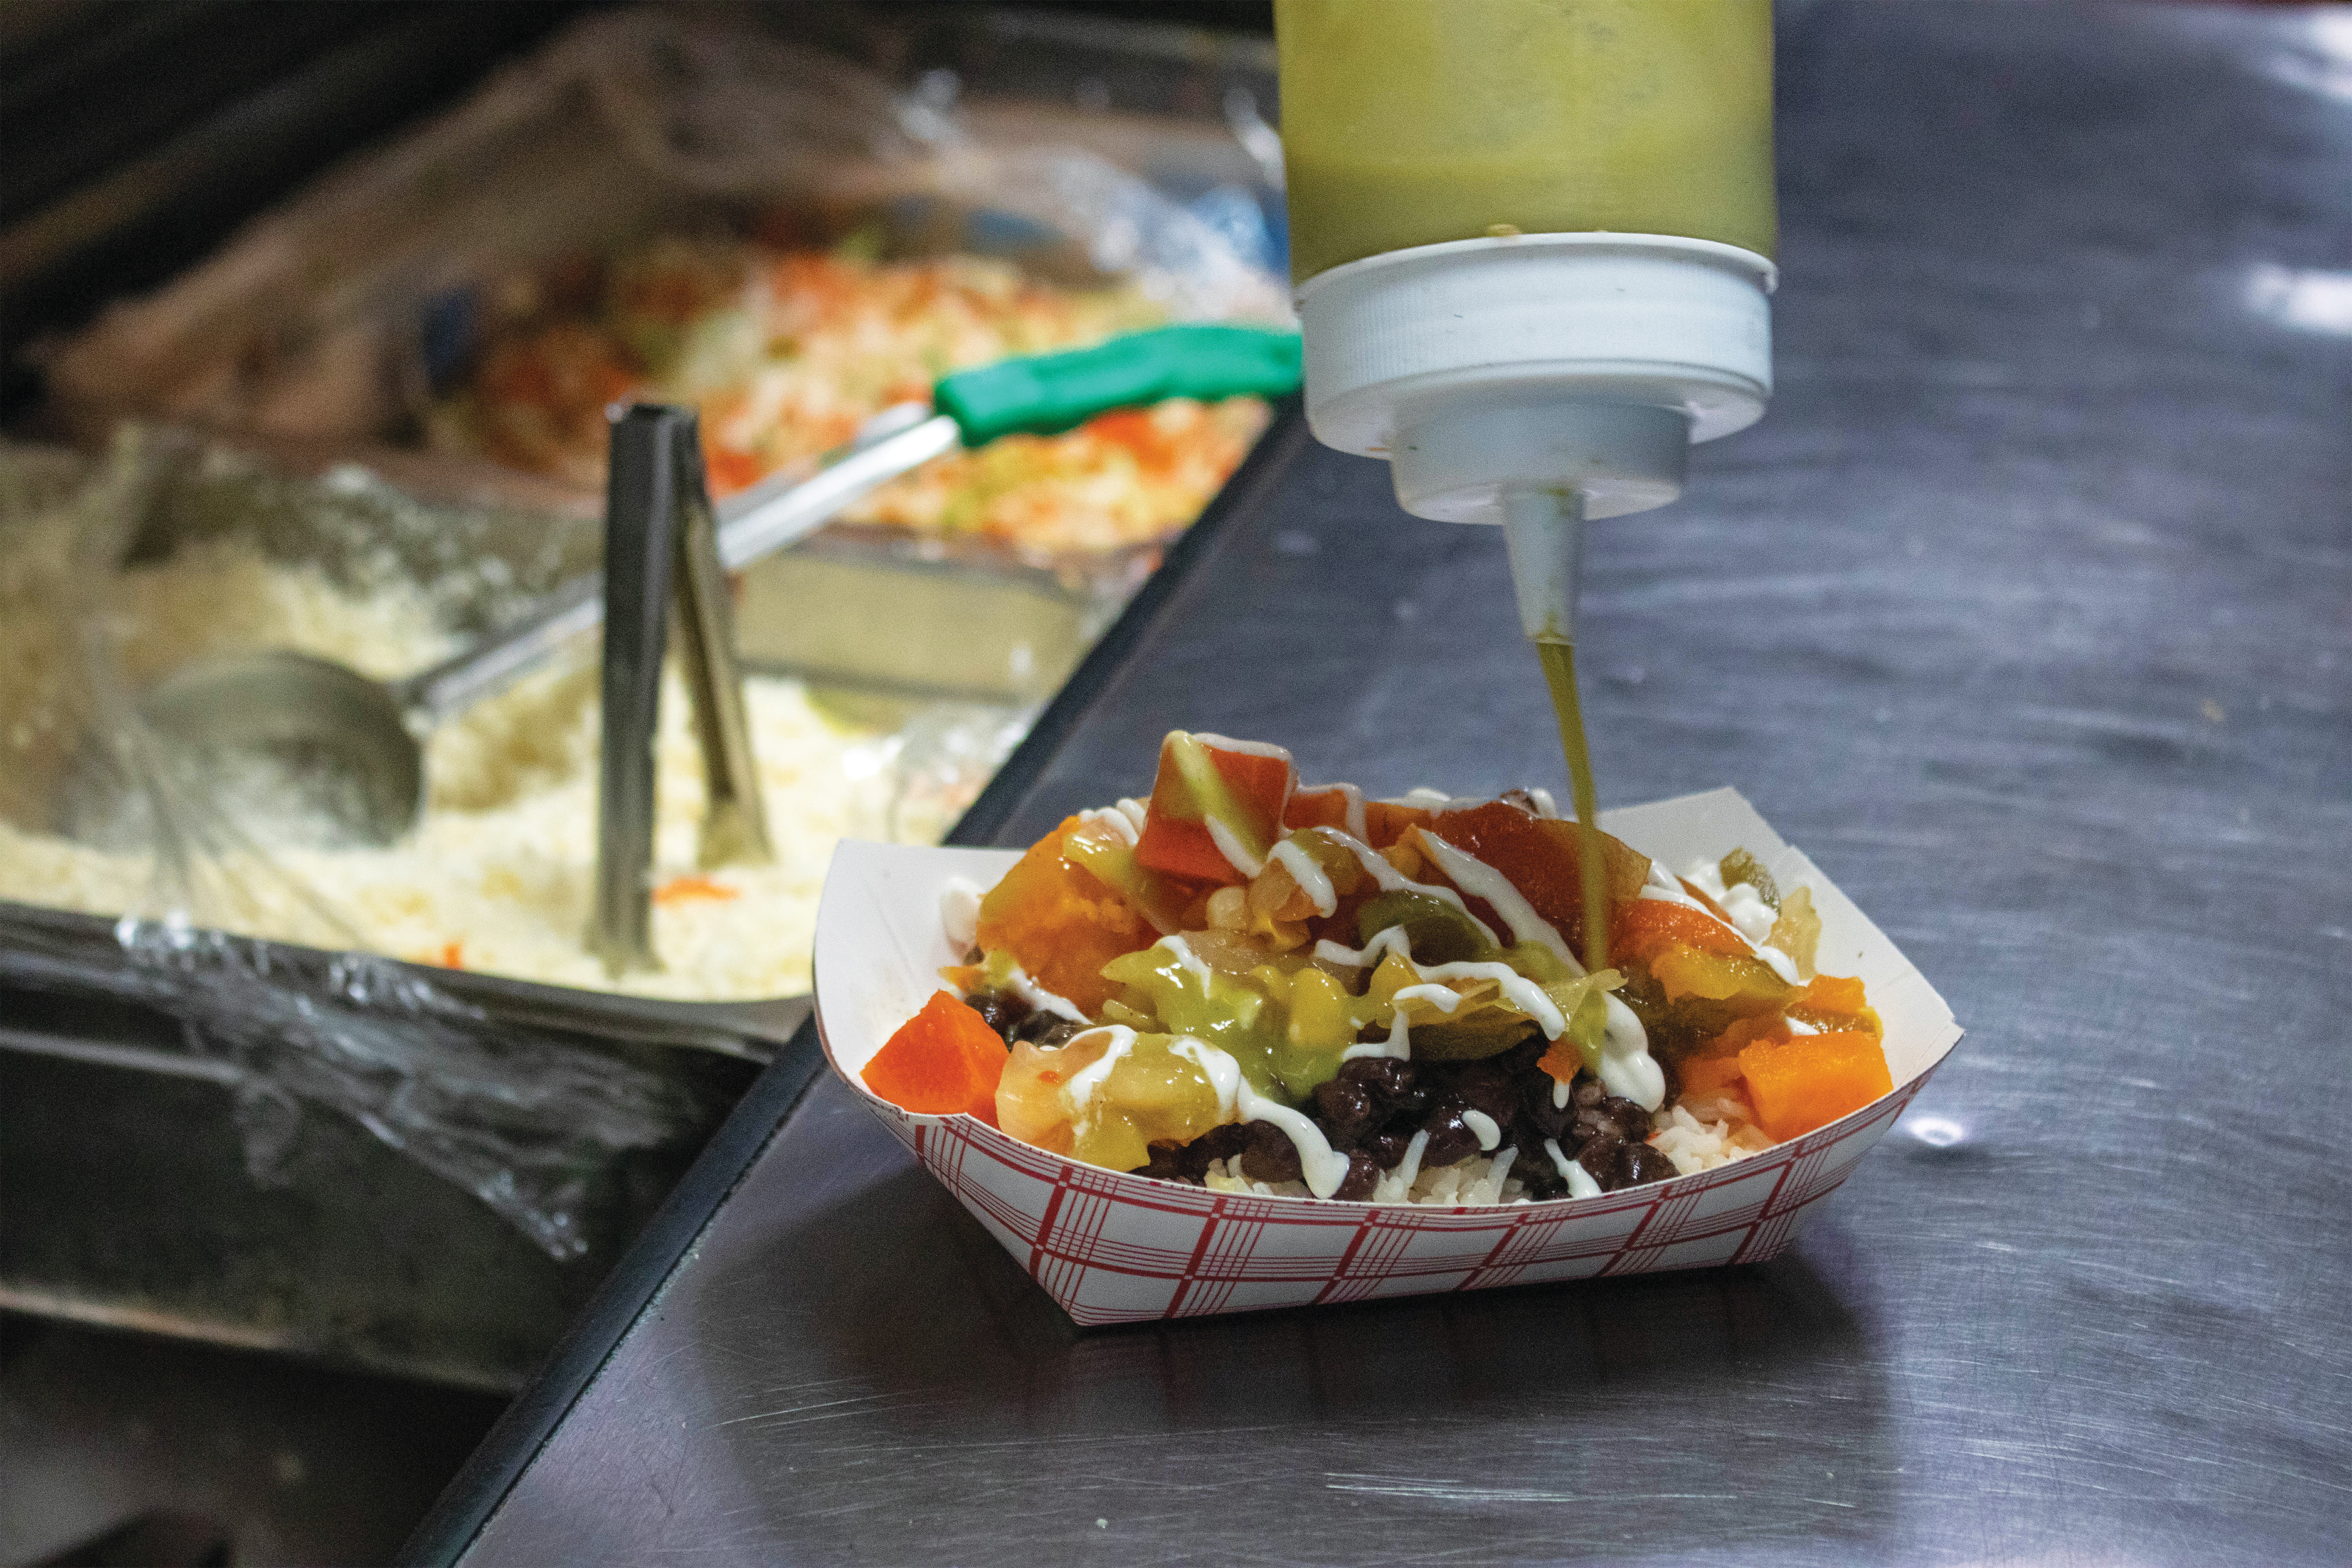 A squeeze bottle drizzling sauce on top of a meal in the food truck